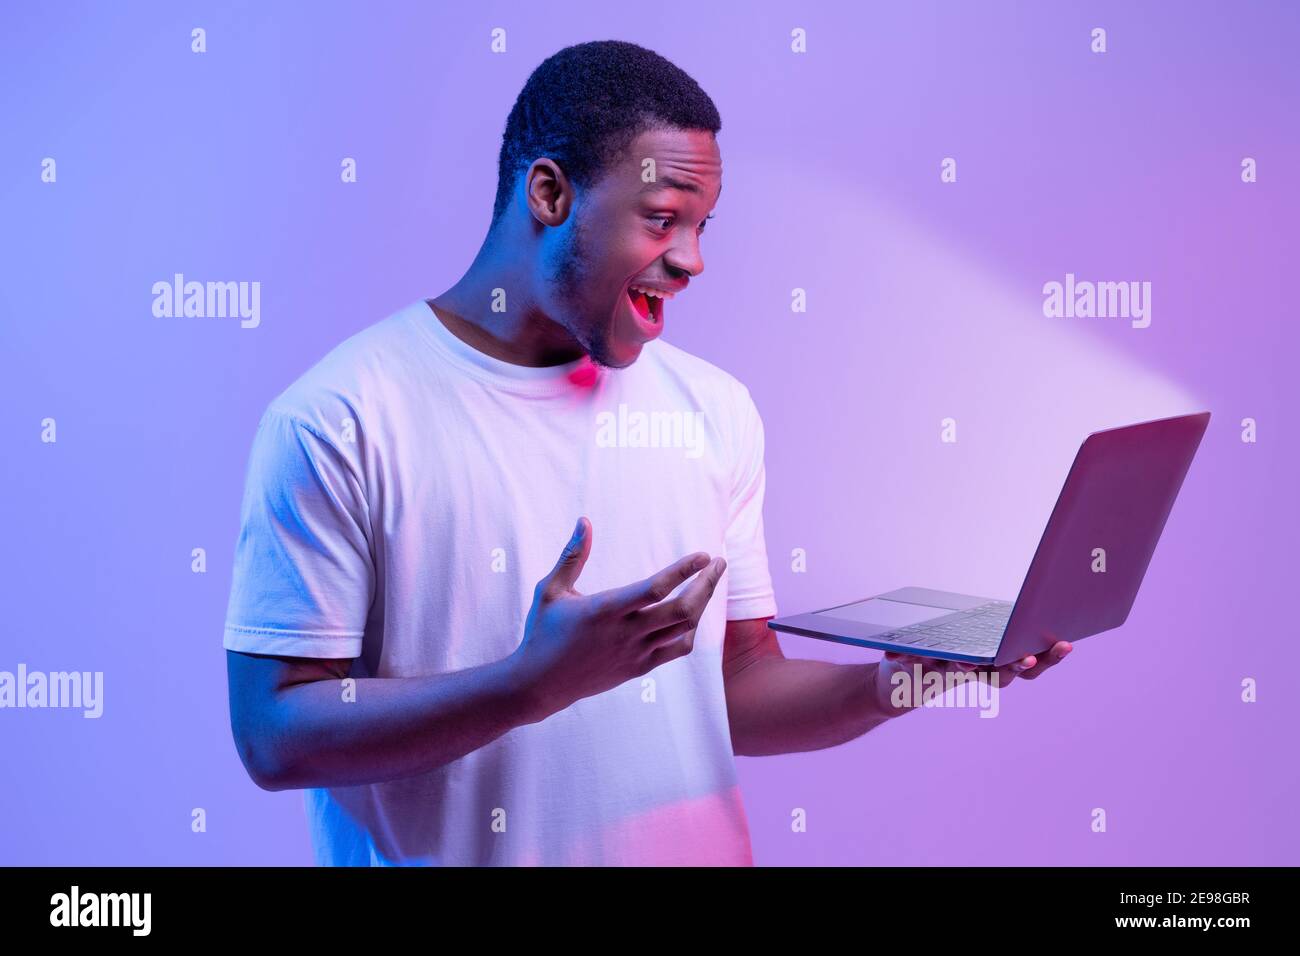 Online Offer. Surprised African Man Holding Laptop Looking At Glowing Screen Stock Photo